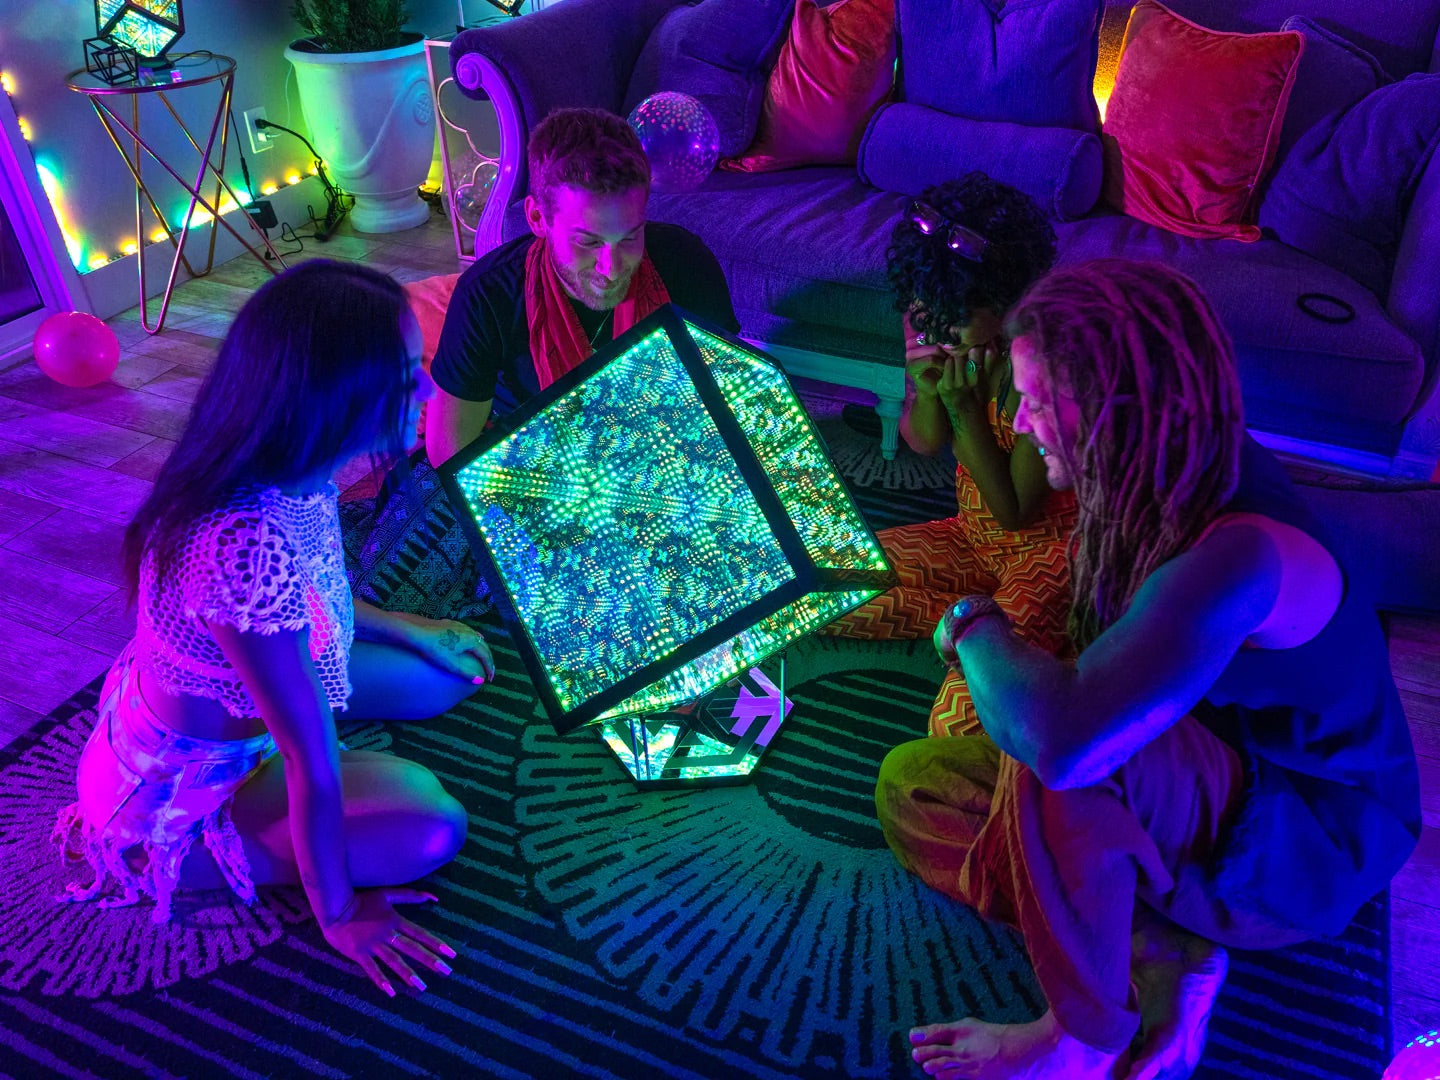 Four persons at a house party sitting down, gathered around a HyperCube, chilling due to decorative lighting ideas